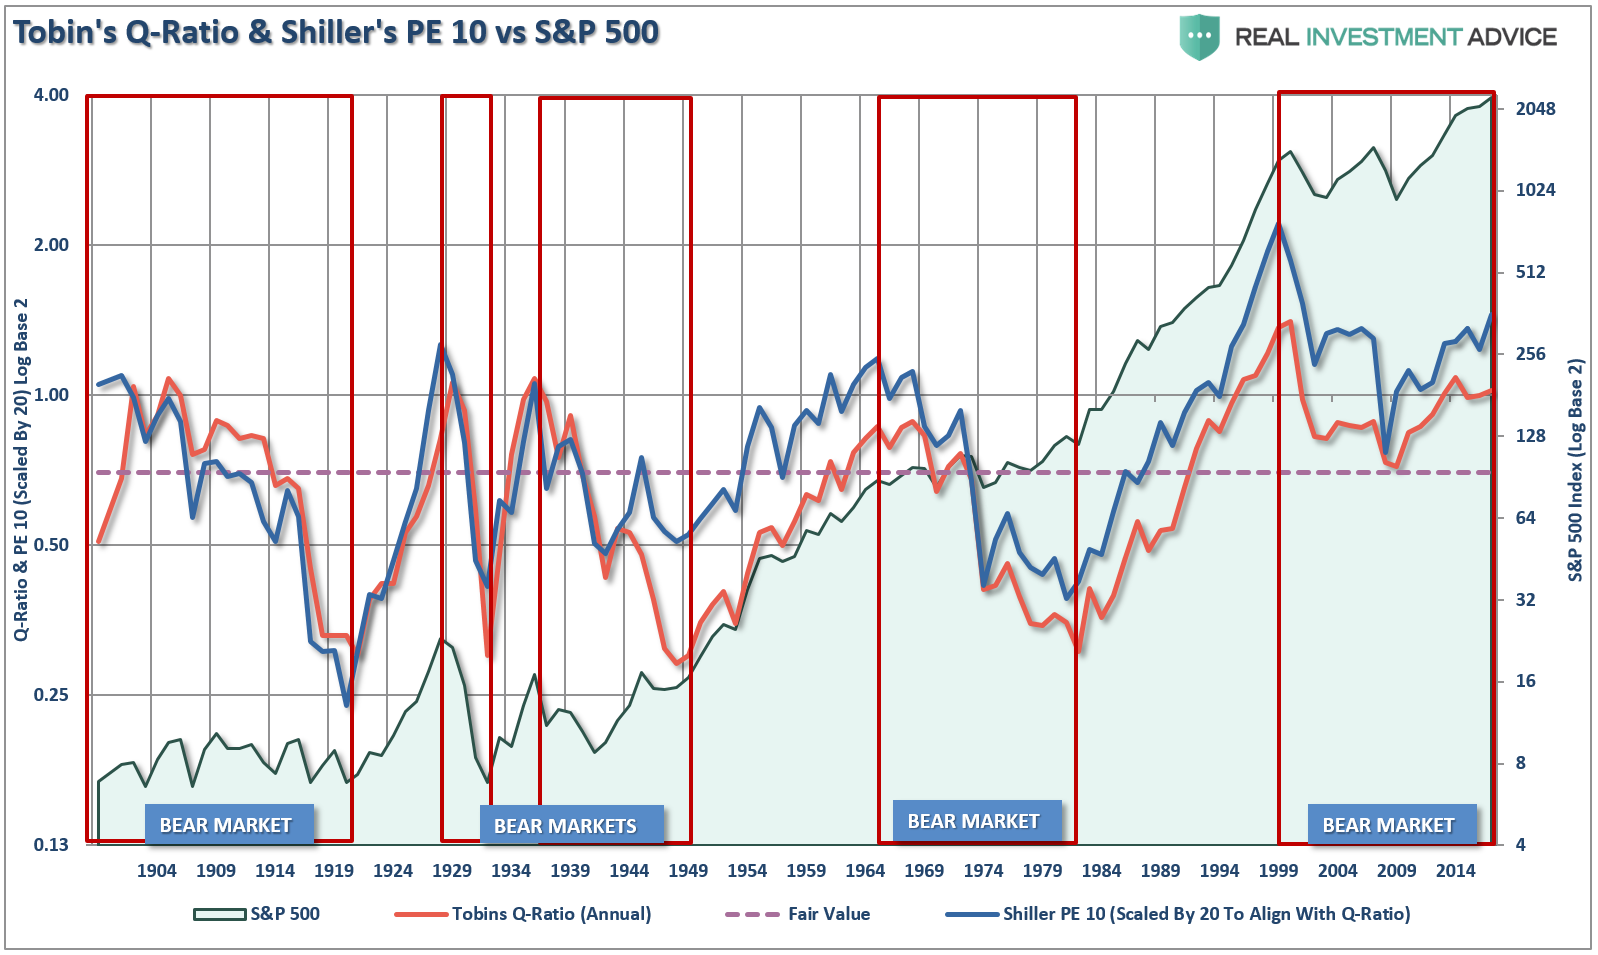 Rising Valuations